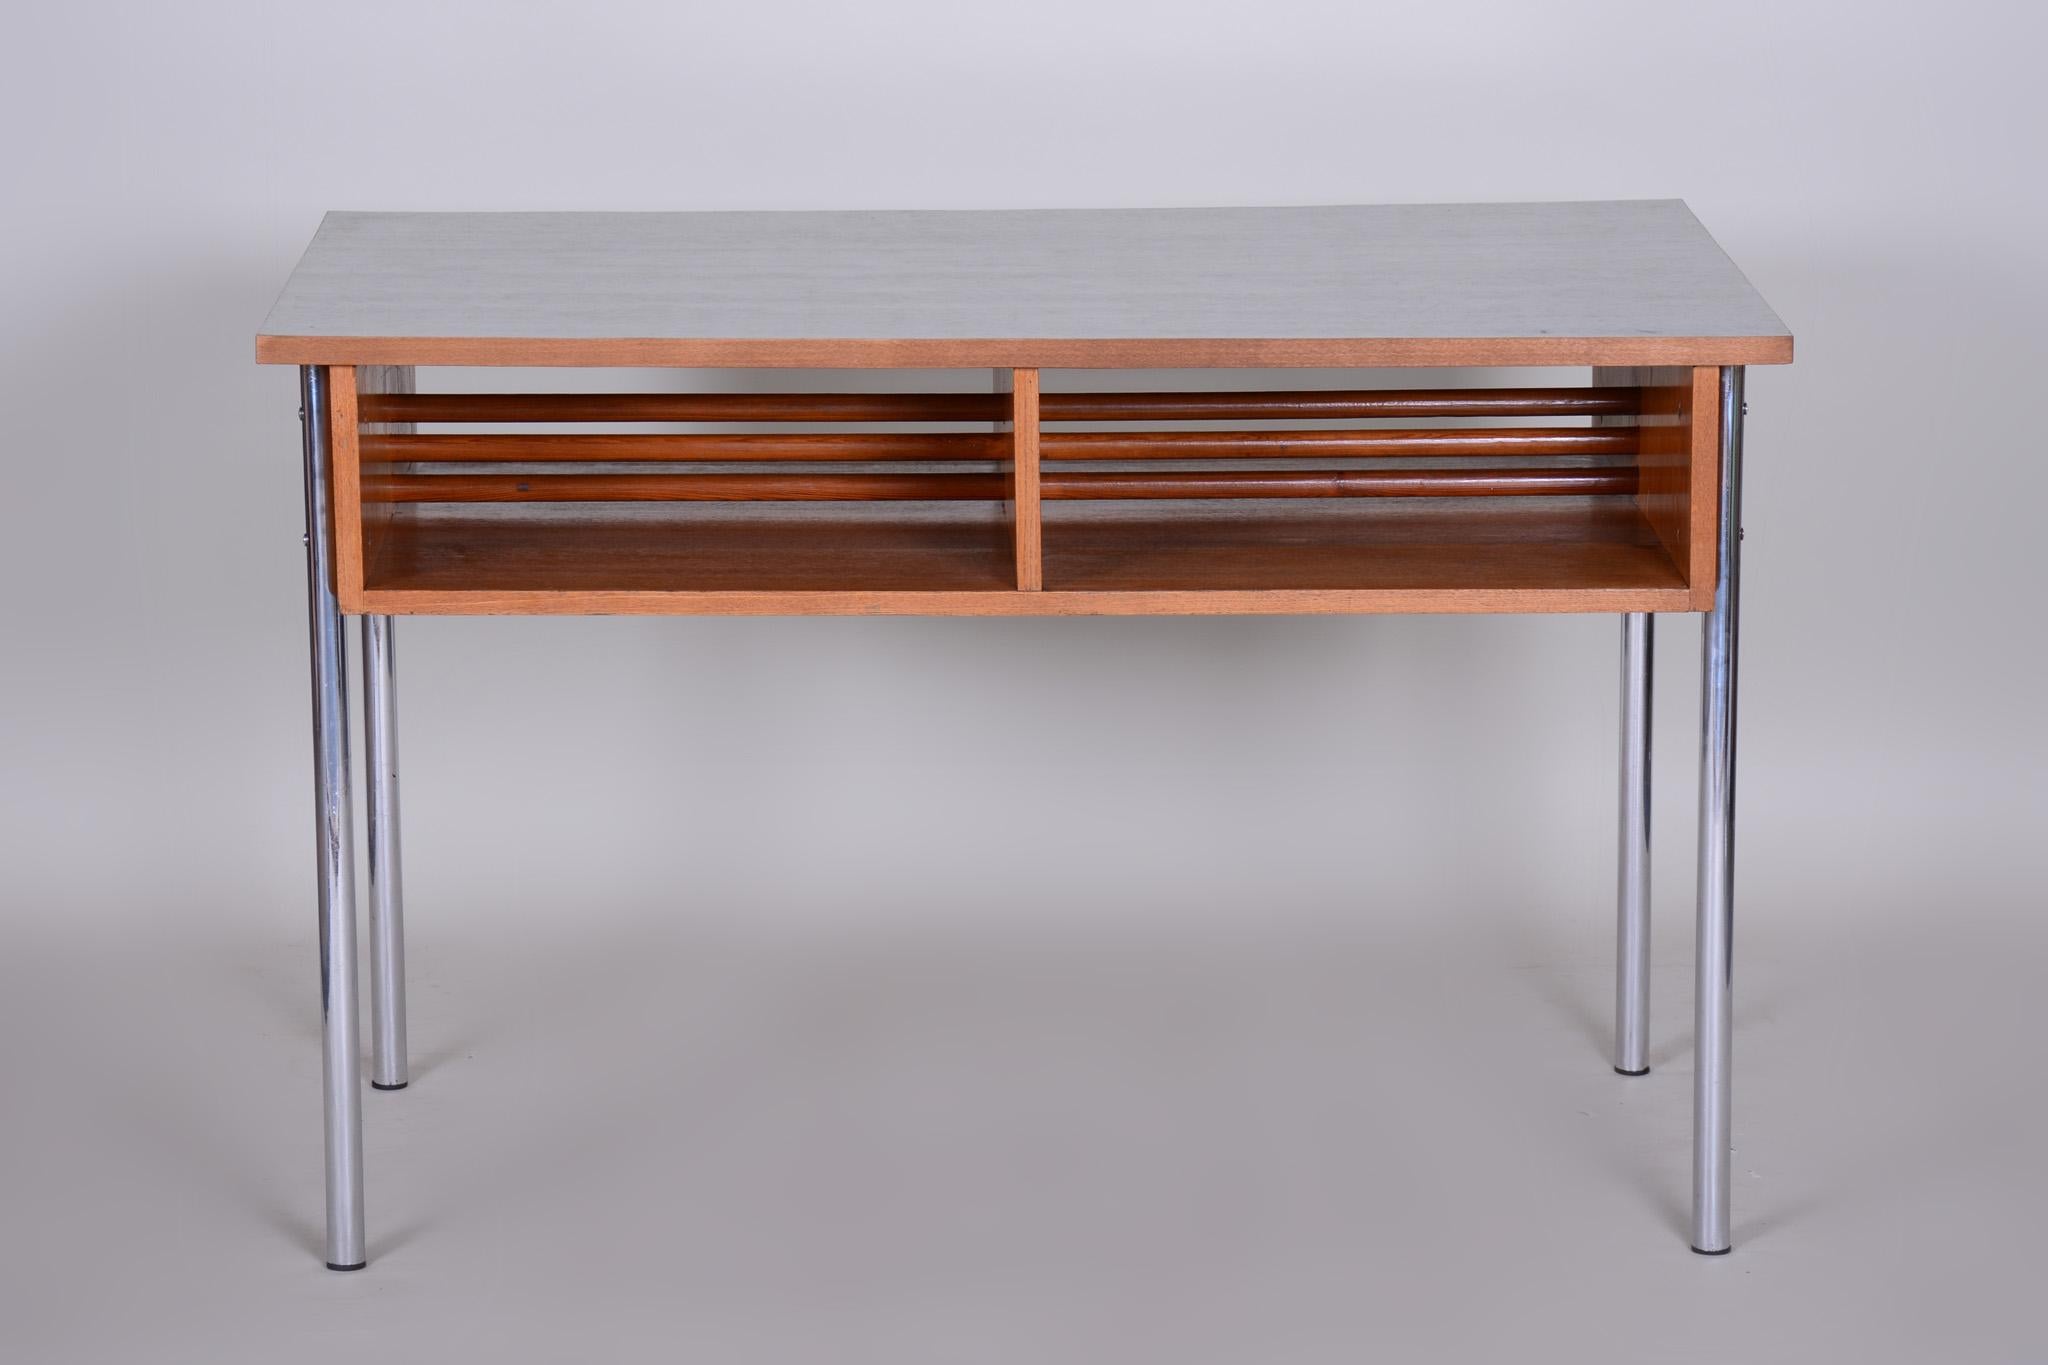 Desk with a legs in tubular chromed steel.
Manufactured by Kovona, Czechoslovakia, in the 1940s.
Very good original condition. Tubular steel with original chrome plating and patina. Fully cleaned.

Source: Czech
Material: Chrome, Oak,